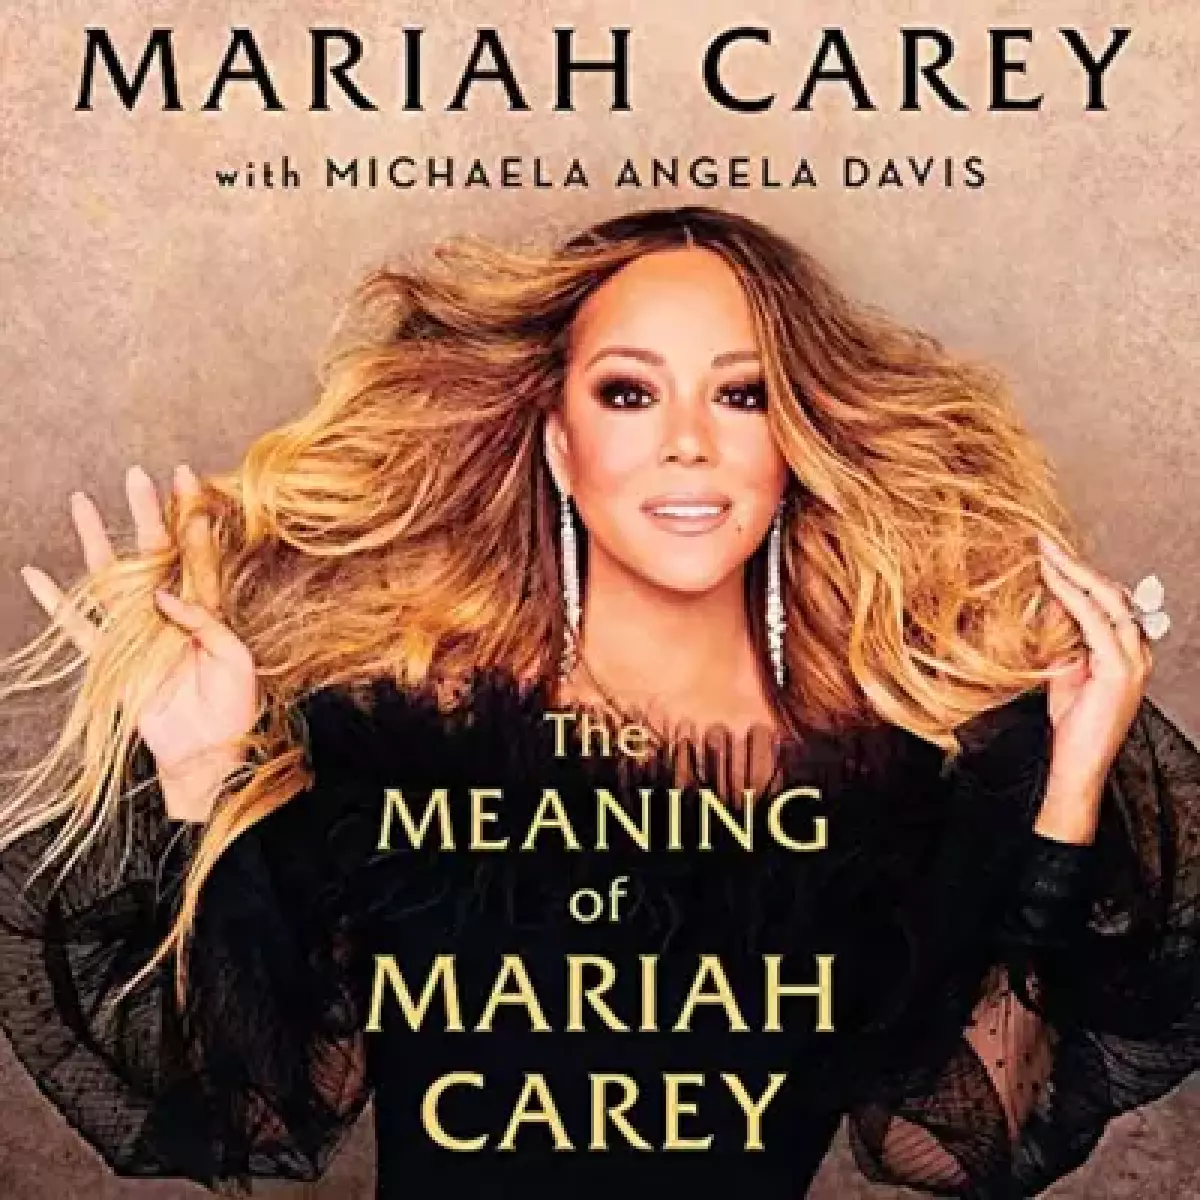 Mariah Carey's journey to rediscover her faith